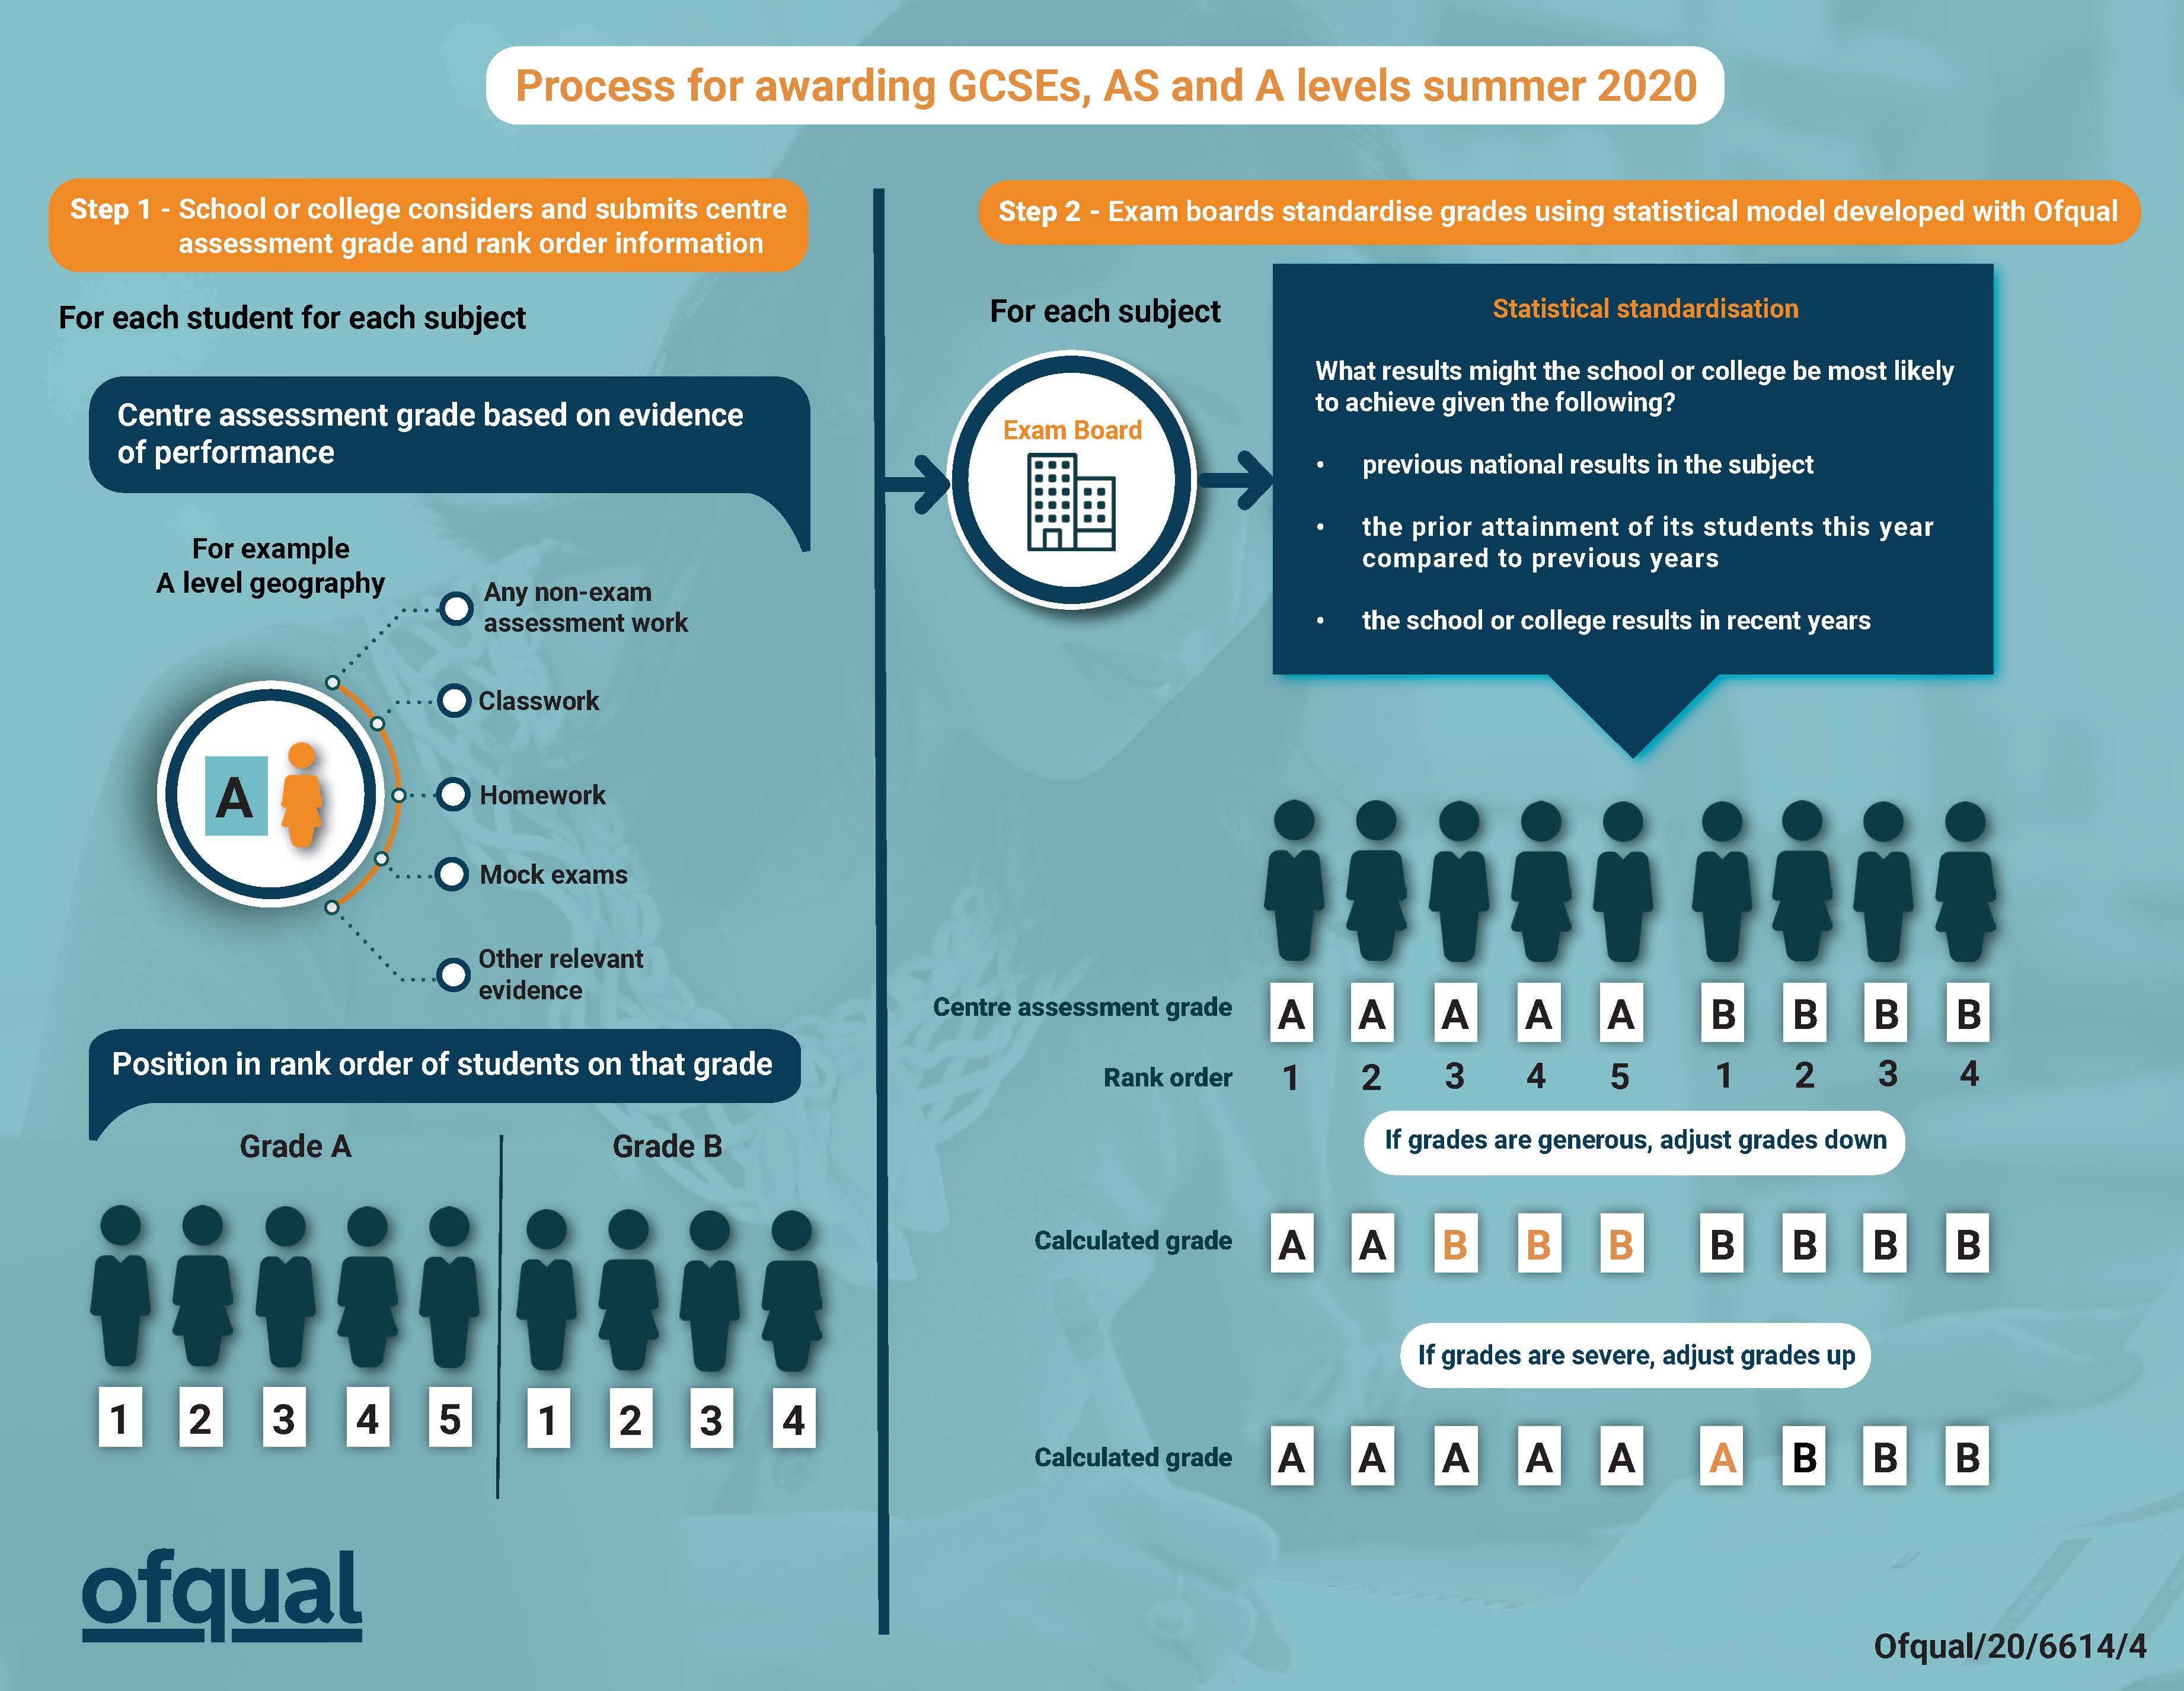 6614-4_Infographic_-_Process_for_awarding_GCSEs__AS_and_A_levels_summer_2020[6].jpg